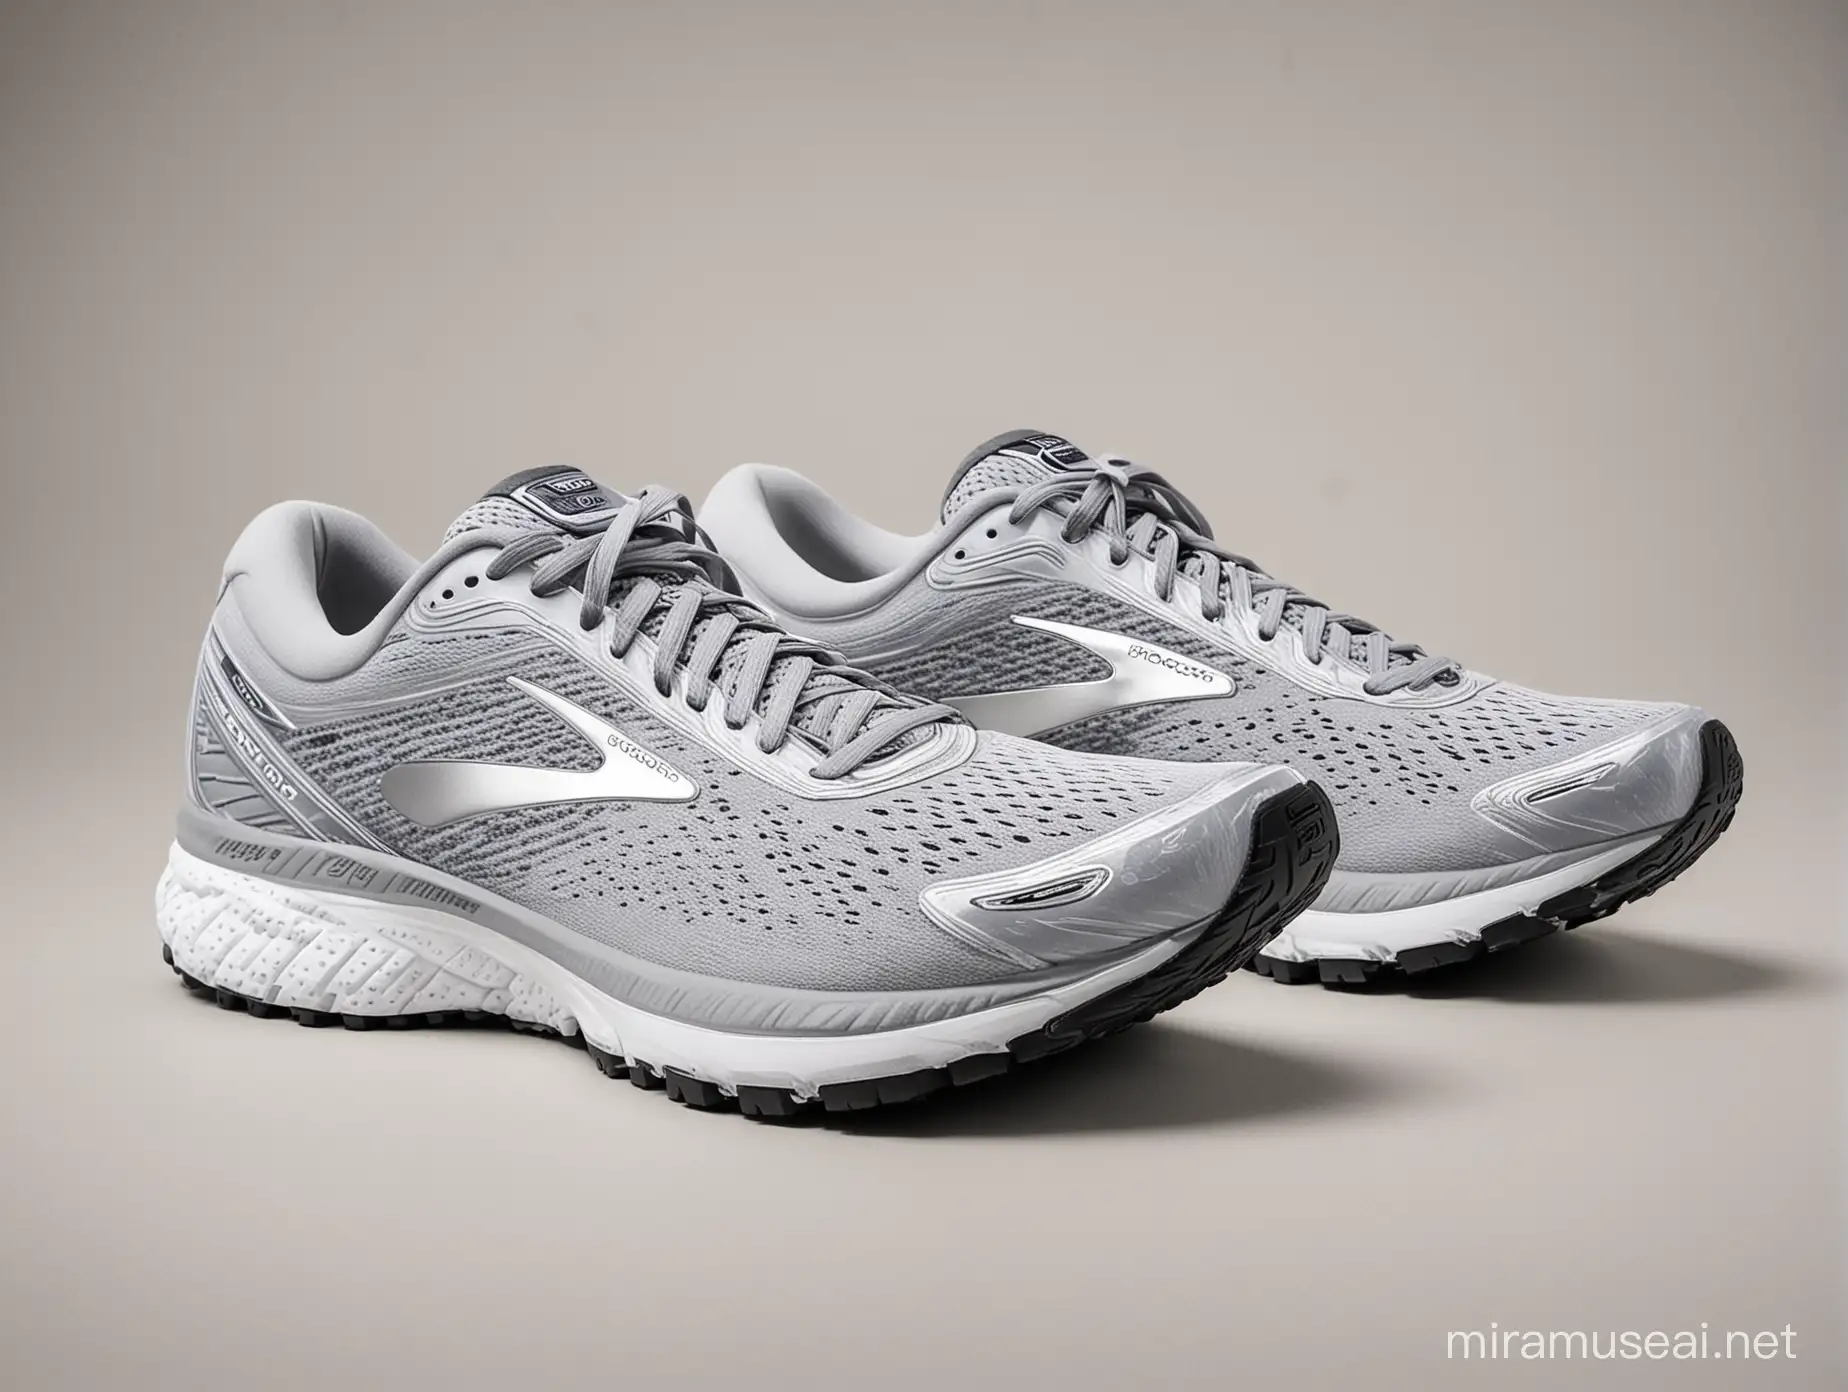 Brooks Ghost 15 Running Shoes and the background is light grey